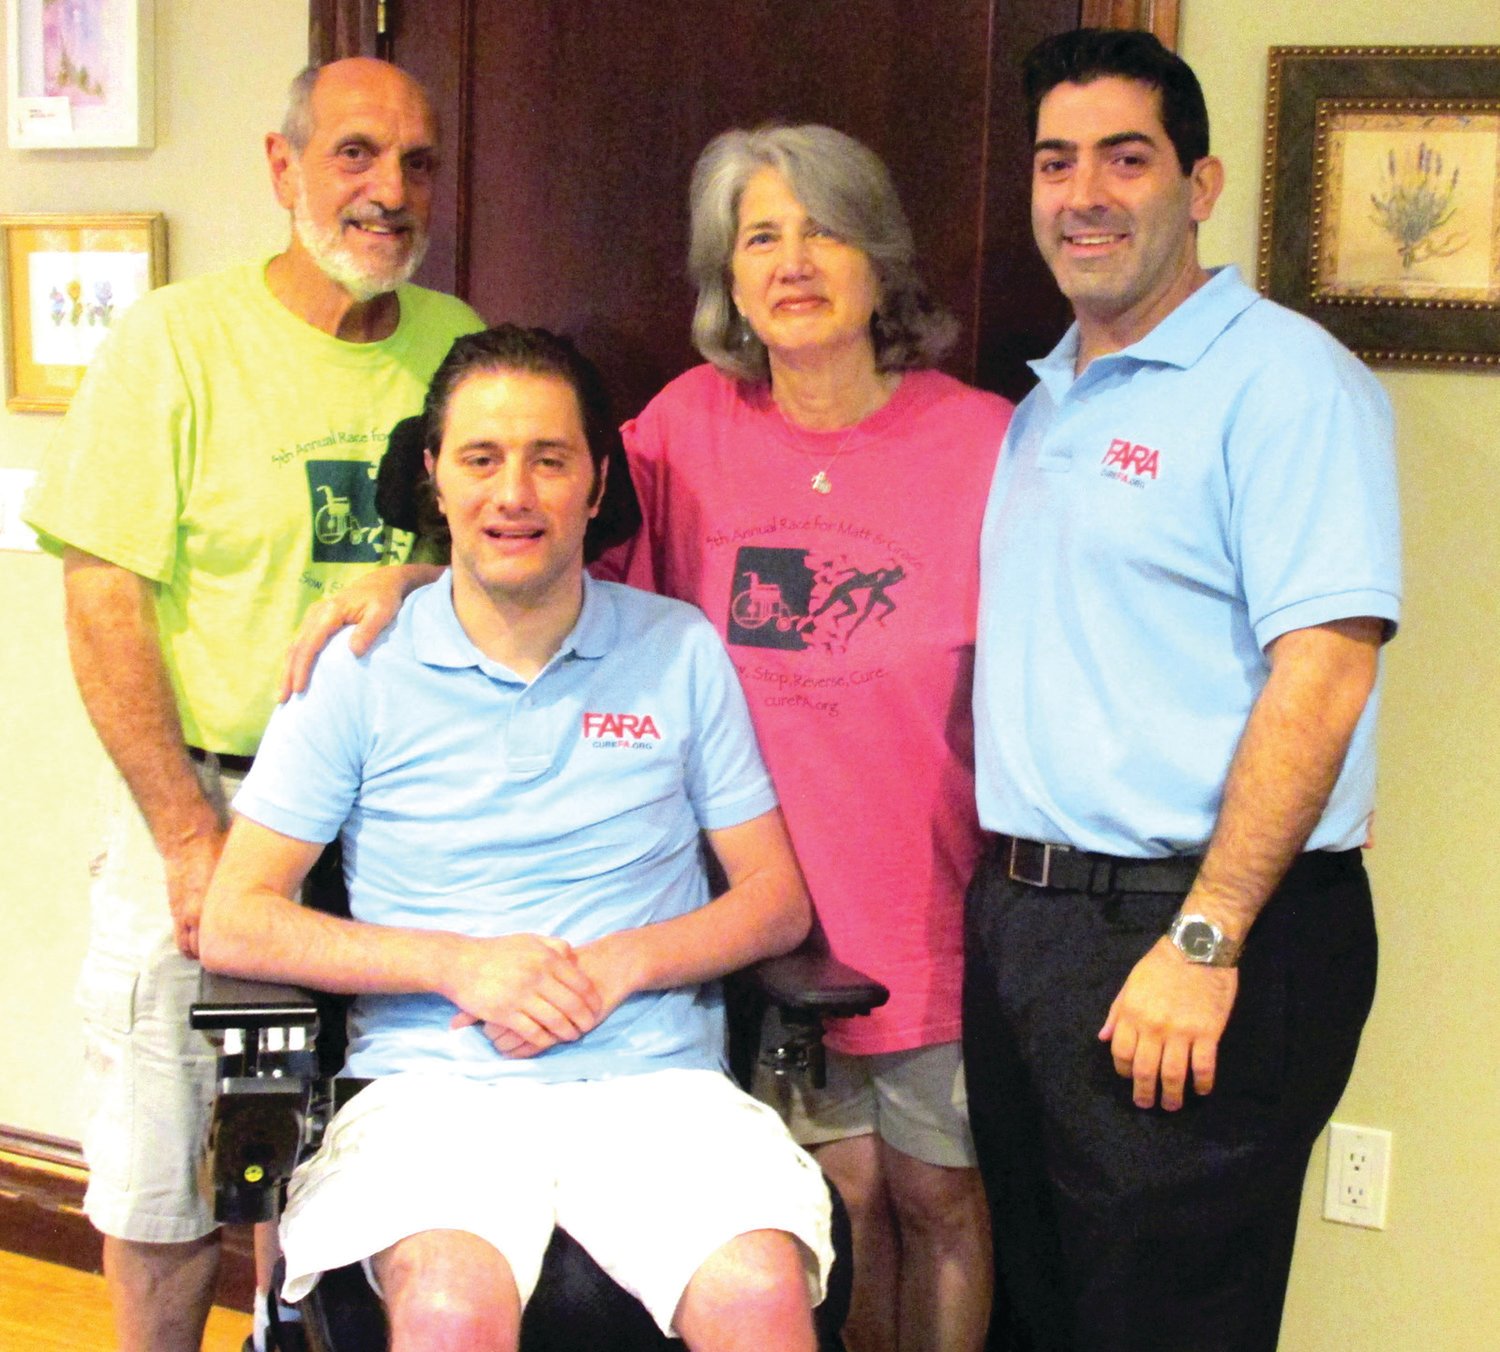 FA-MILY: Sallyann DiIorio, family friend Vincent LaFazia, Jack DiIorio and Michael Crawley, have committed to continue raising money for FARA following the death of Matthew DiIorio last July. This is their 12th year raising money for the FA advocacy group, and the second time holding events since losing Matthew to the disease.